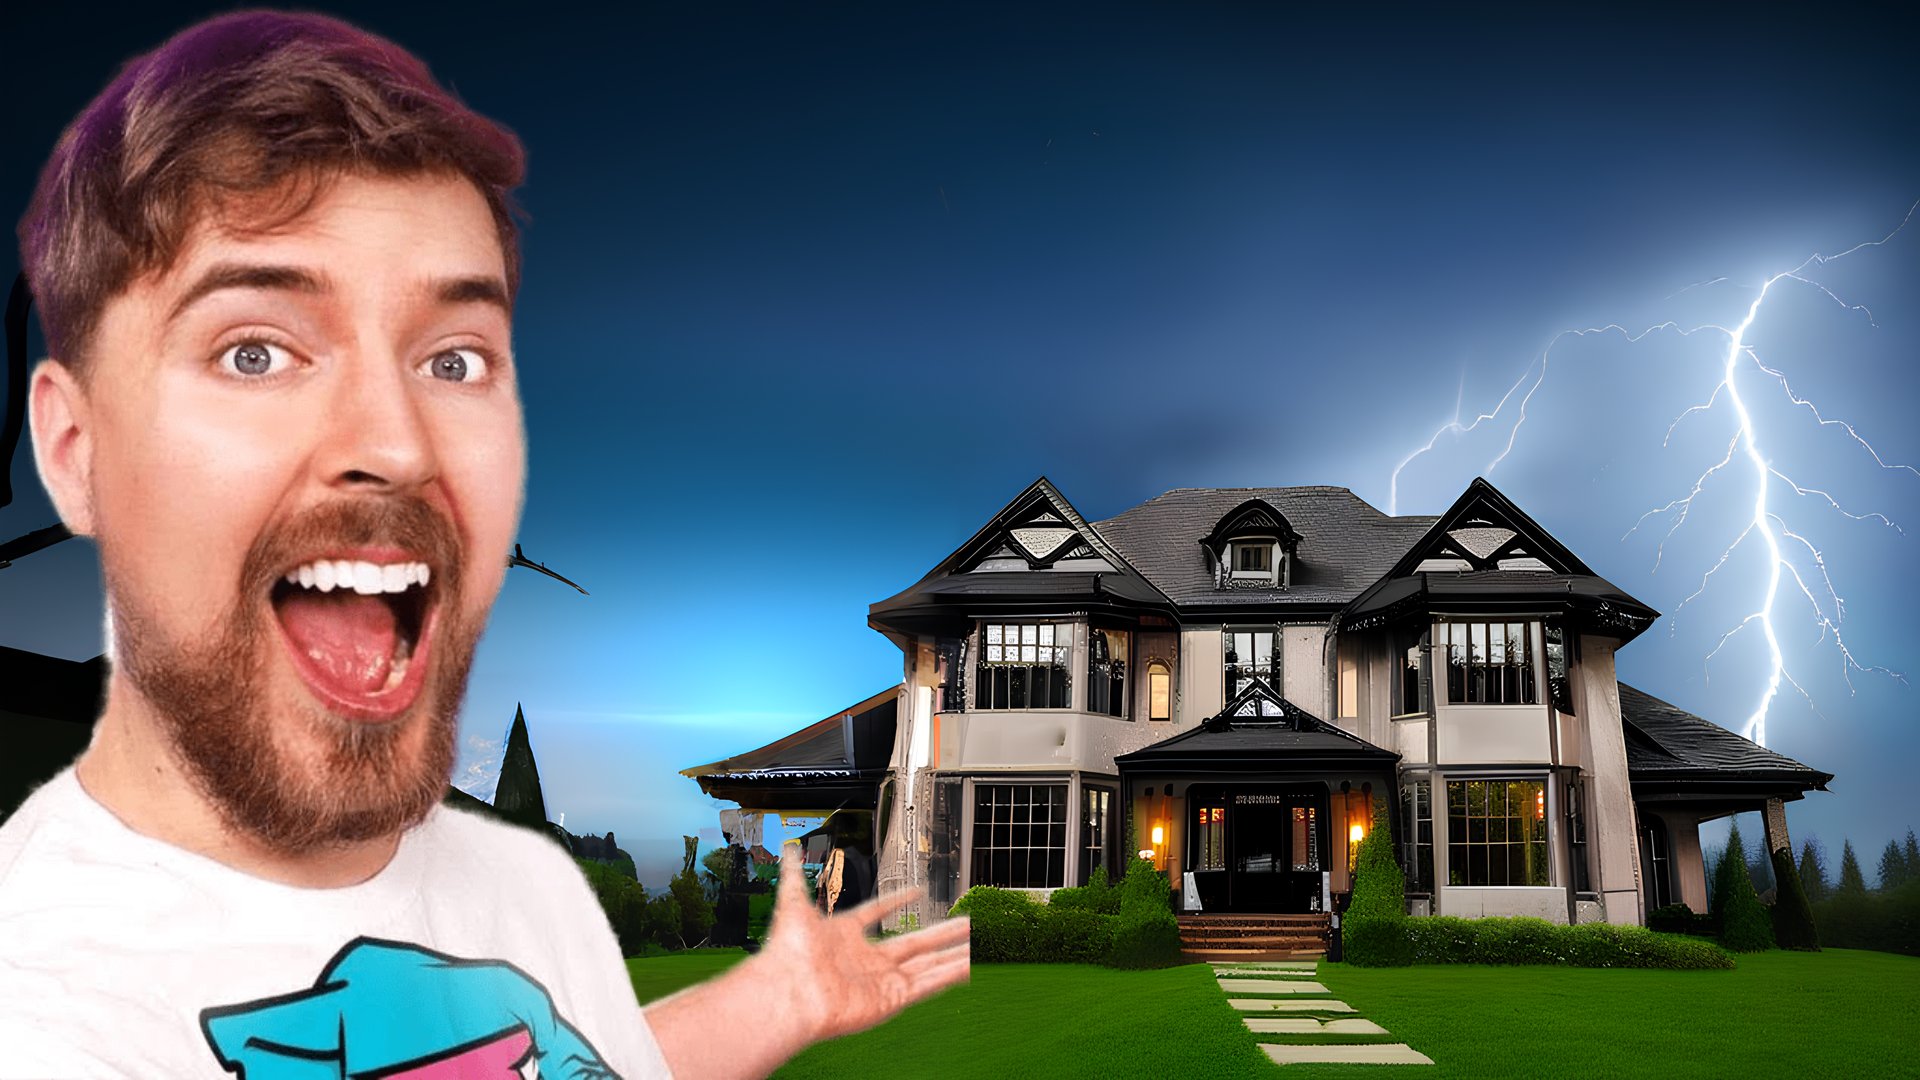 Last One To Leave Abandoned Mansion Keeps It! Thumbnail